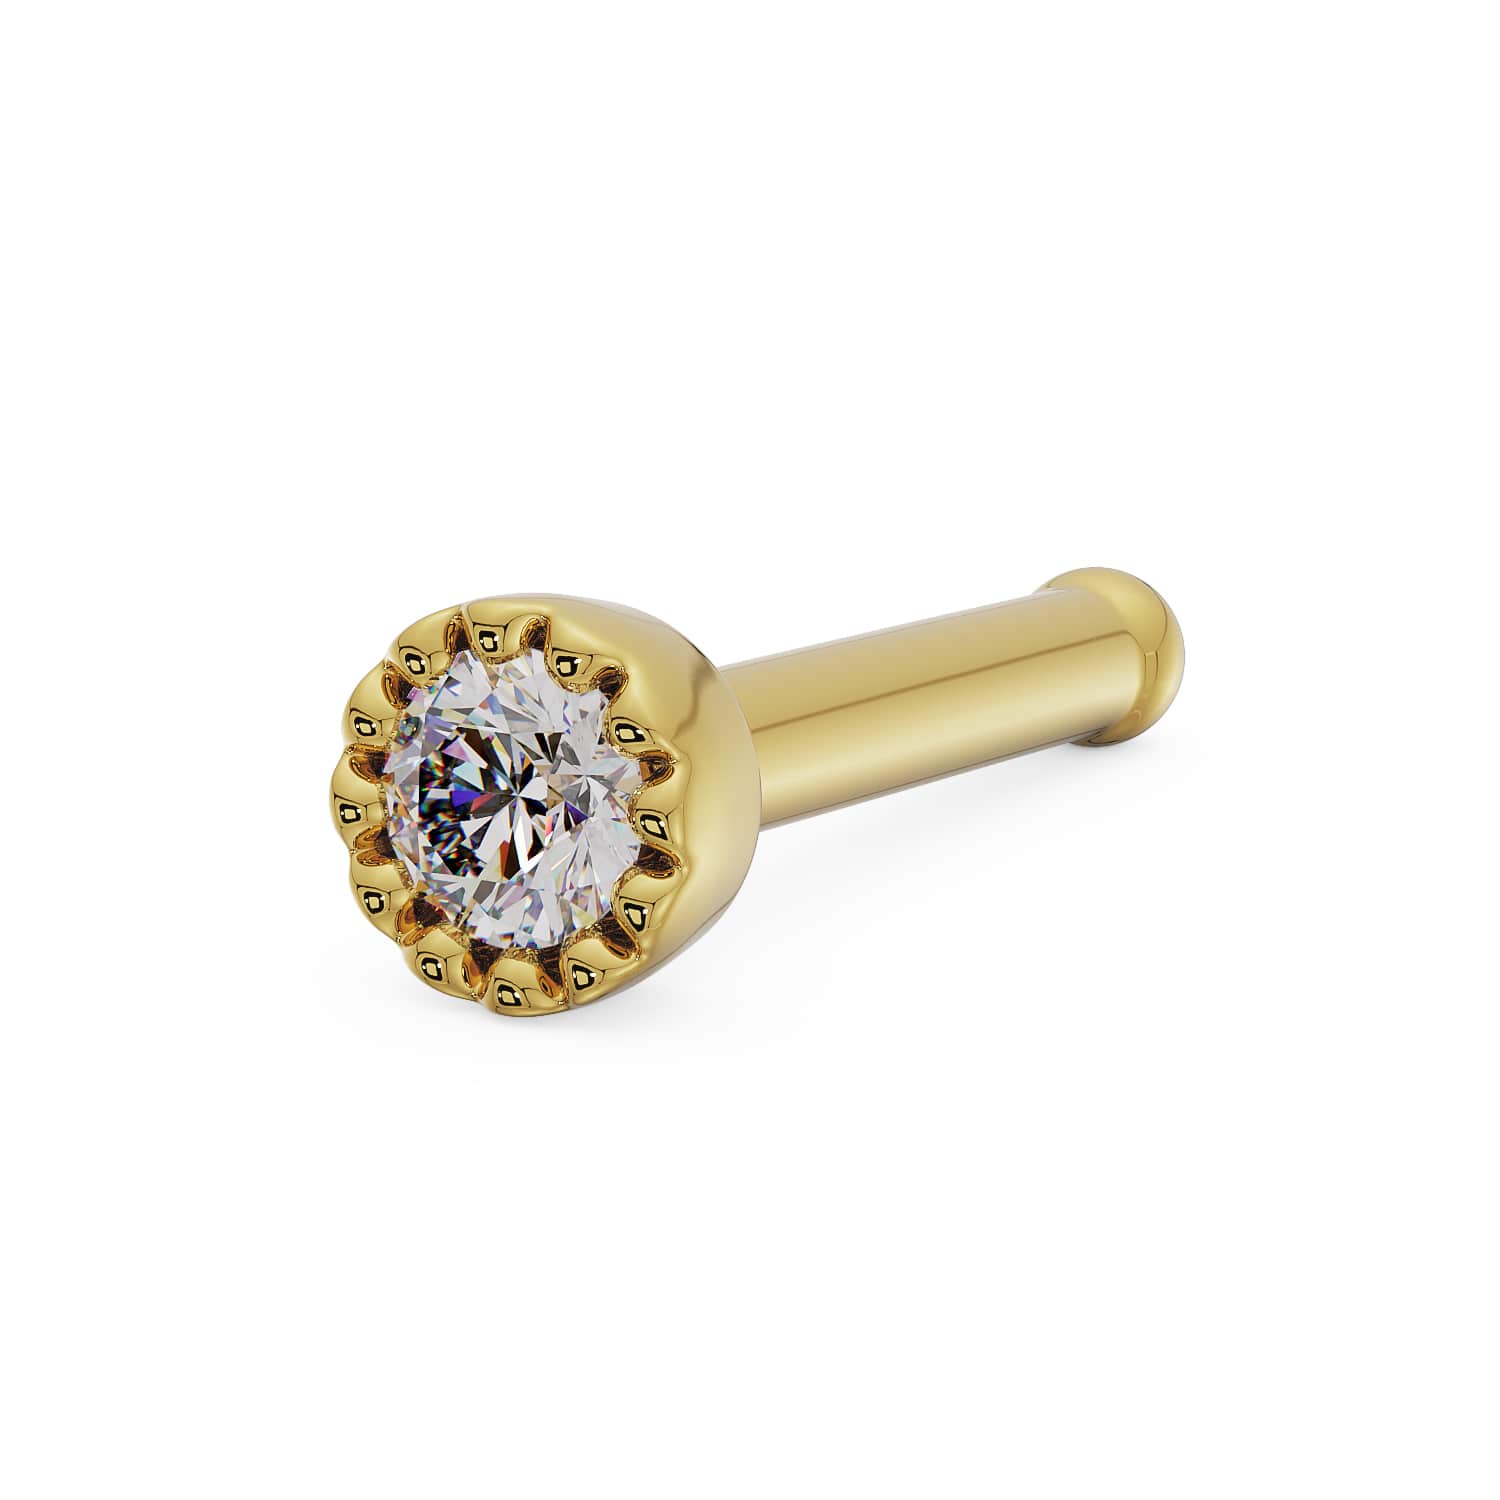 Flower nose stud in 18ct yellow gold